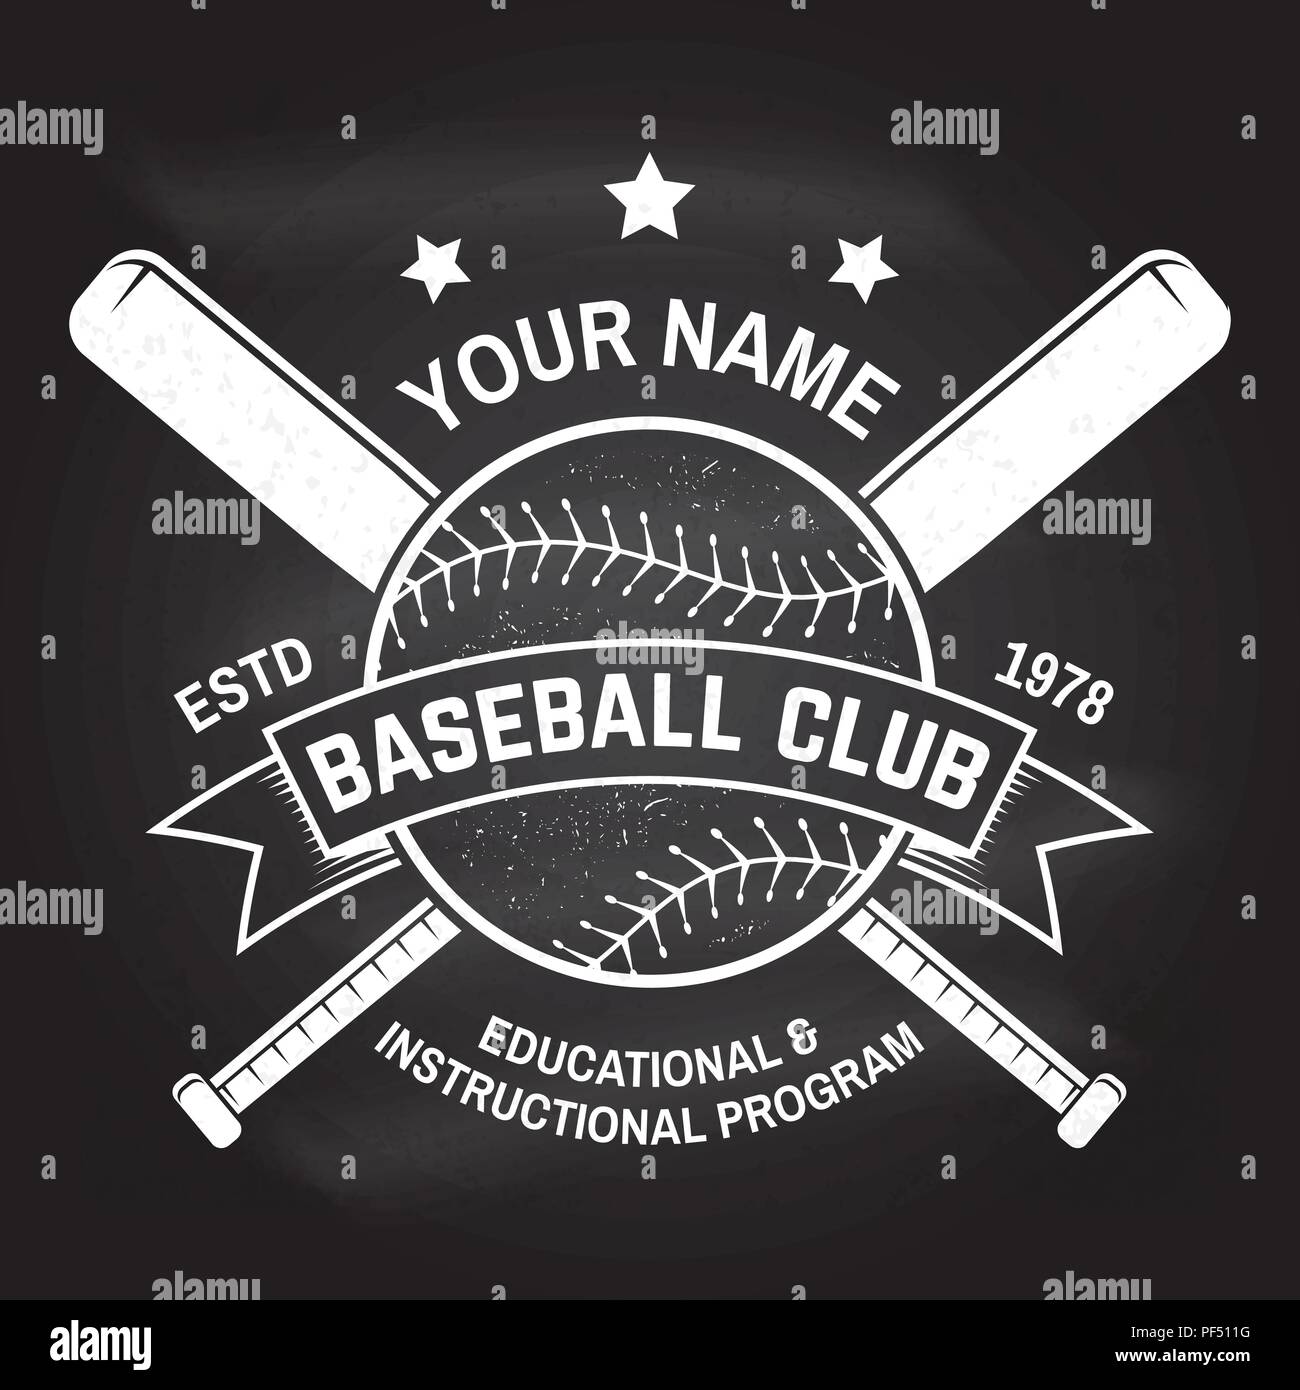 Baseball club badge on the chalkboard. Vector illustration. Concept for shirt or logo, print, stamp or tee. Vintage typography design with baseball bats and ball for baseball silhouette. Stock Vector